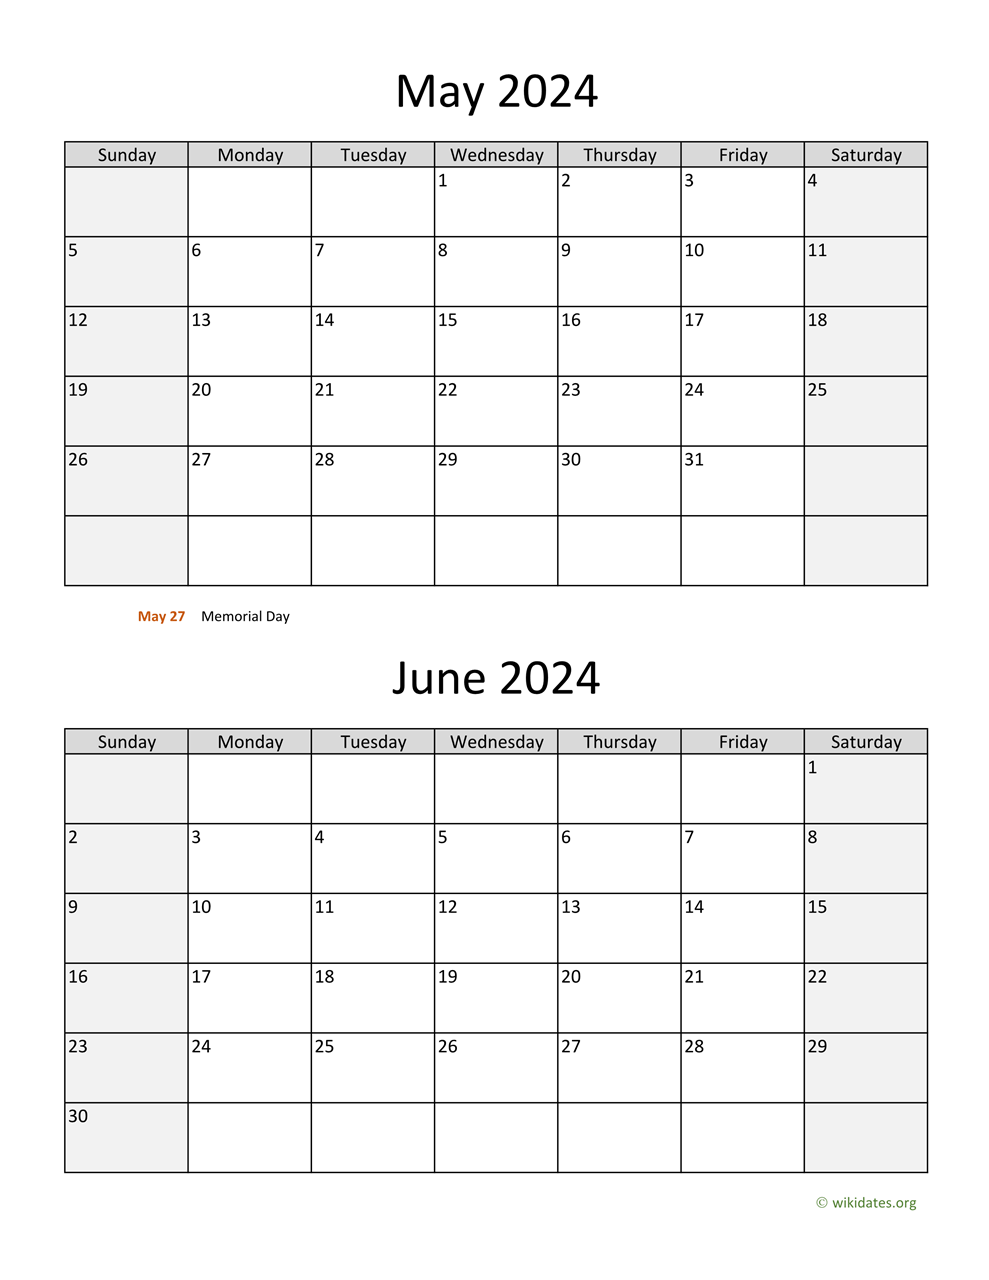 May and June 2024 Calendar WikiDates org